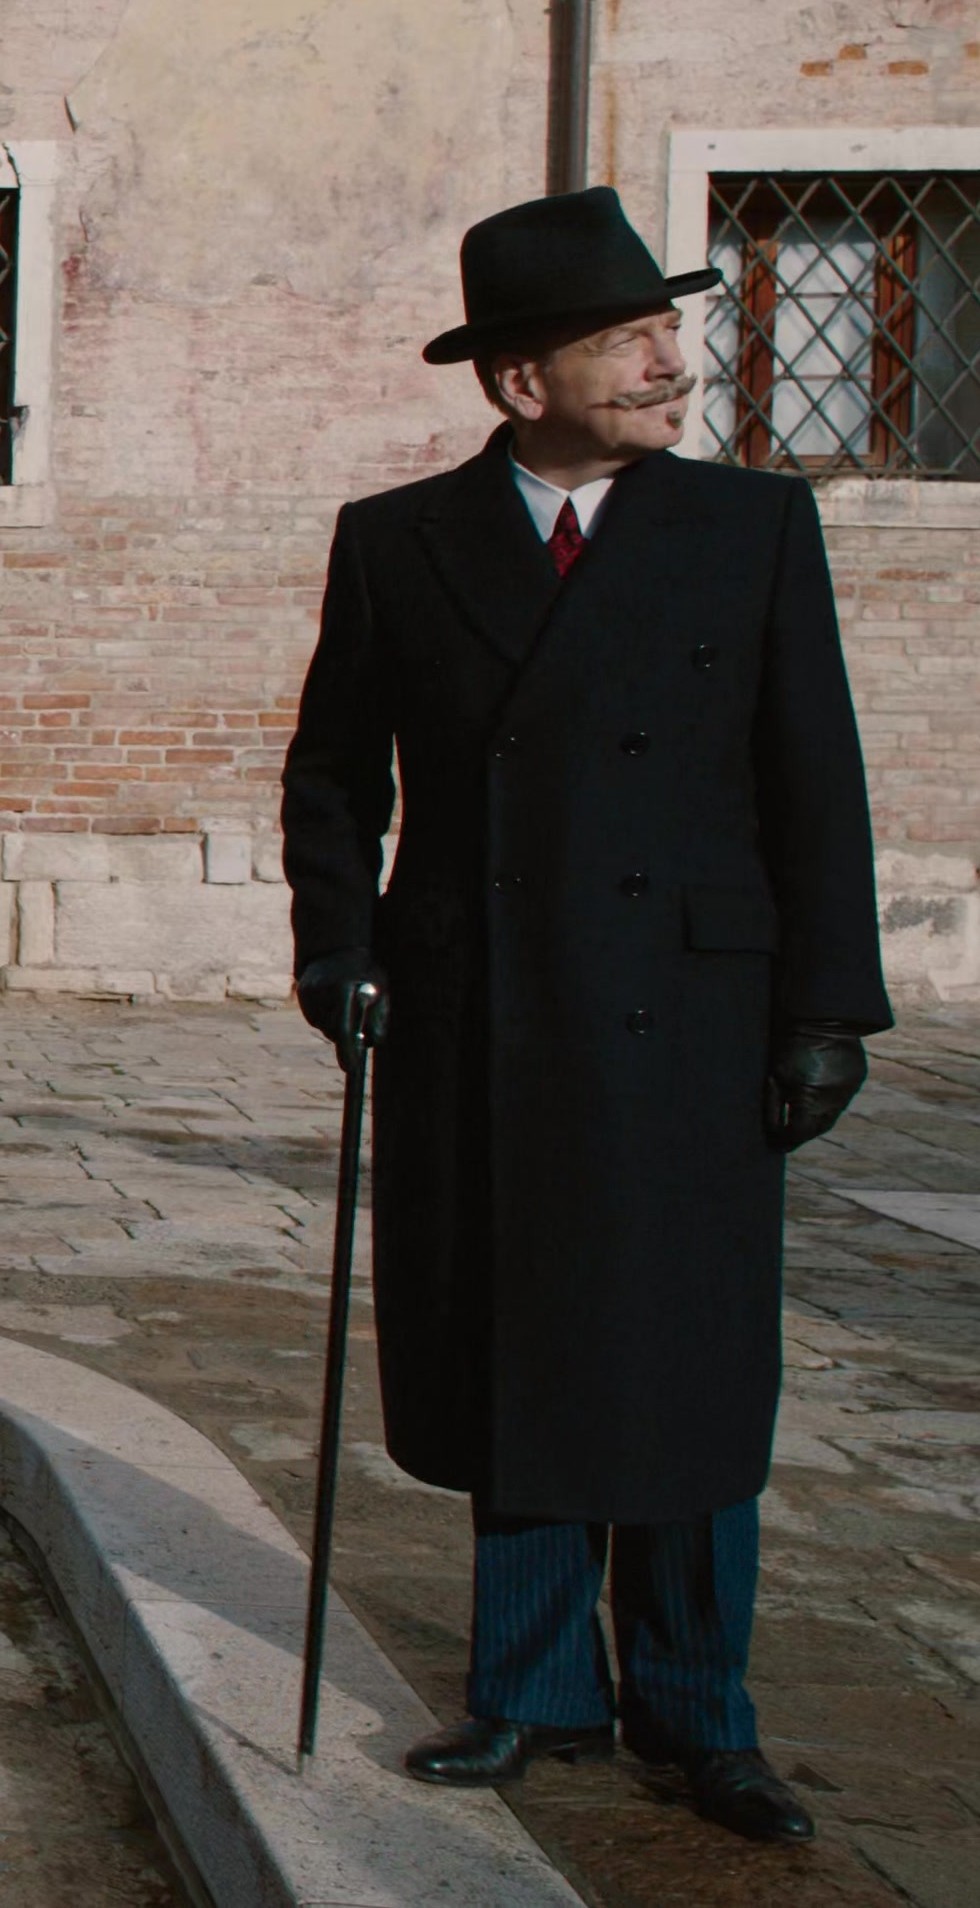 Worn on A Haunting in Venice (2023) Movie - Black Leather Lace-Up Dress Shoes Worn by Kenneth Branagh as Hercule Poirot